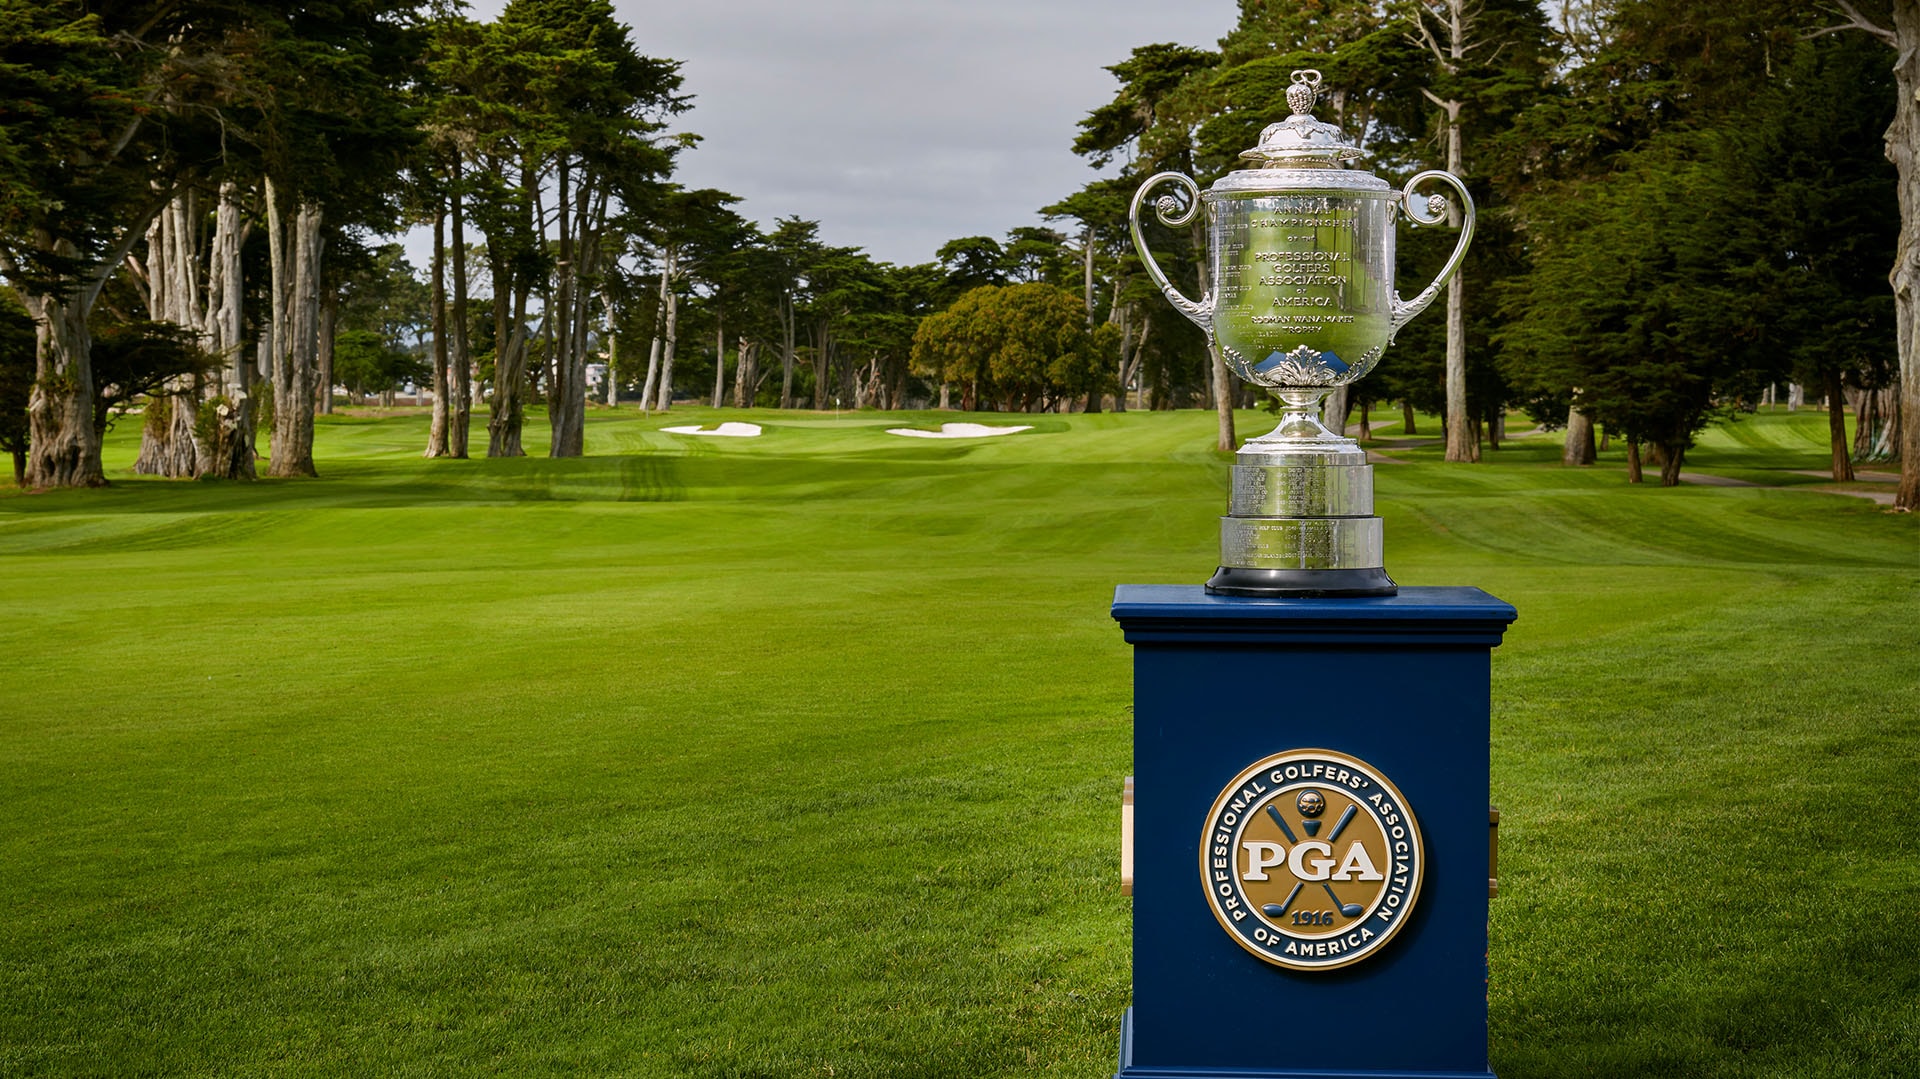 Final-round tee times for the 2020 PGA Championship